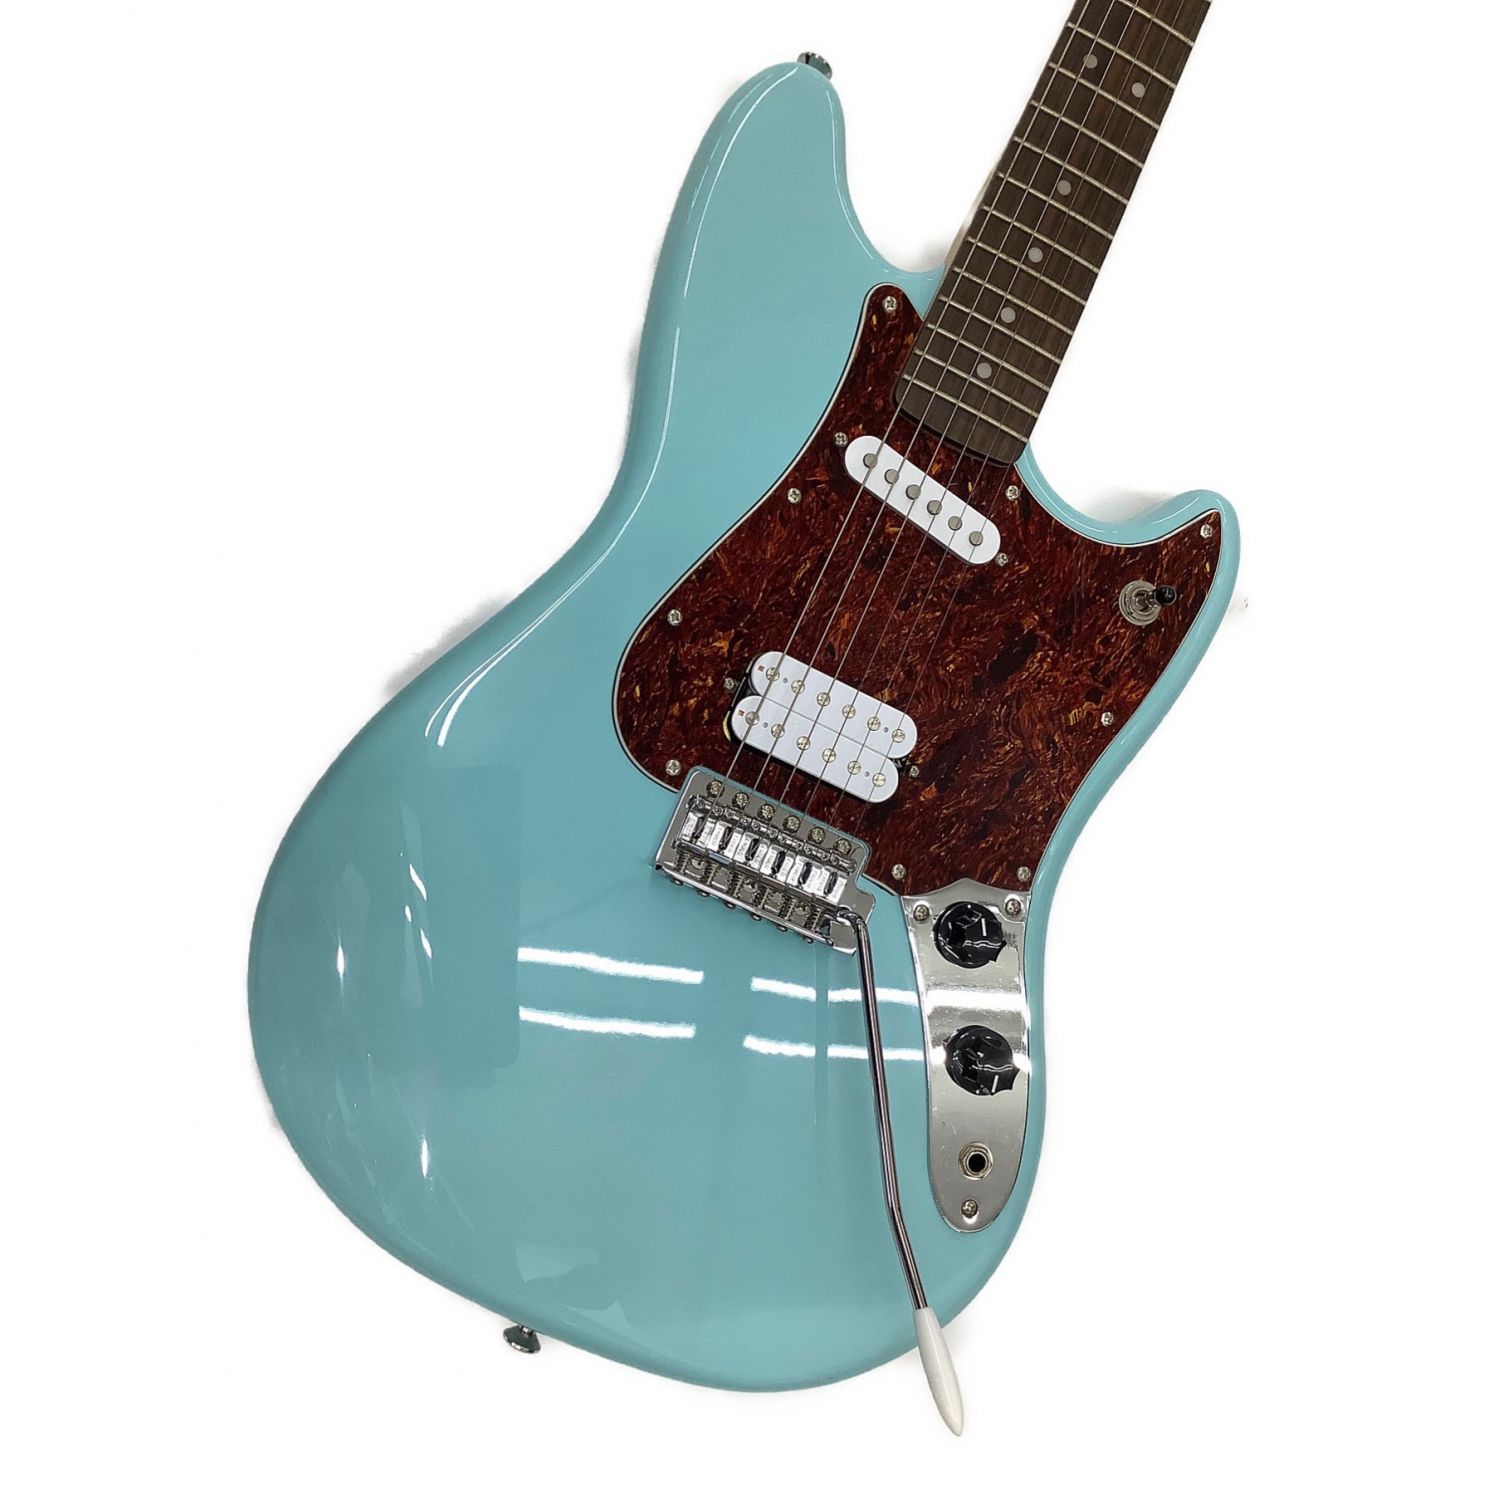 Squier by Fender CYCLONE スクワイア サイクロン - エレキギター